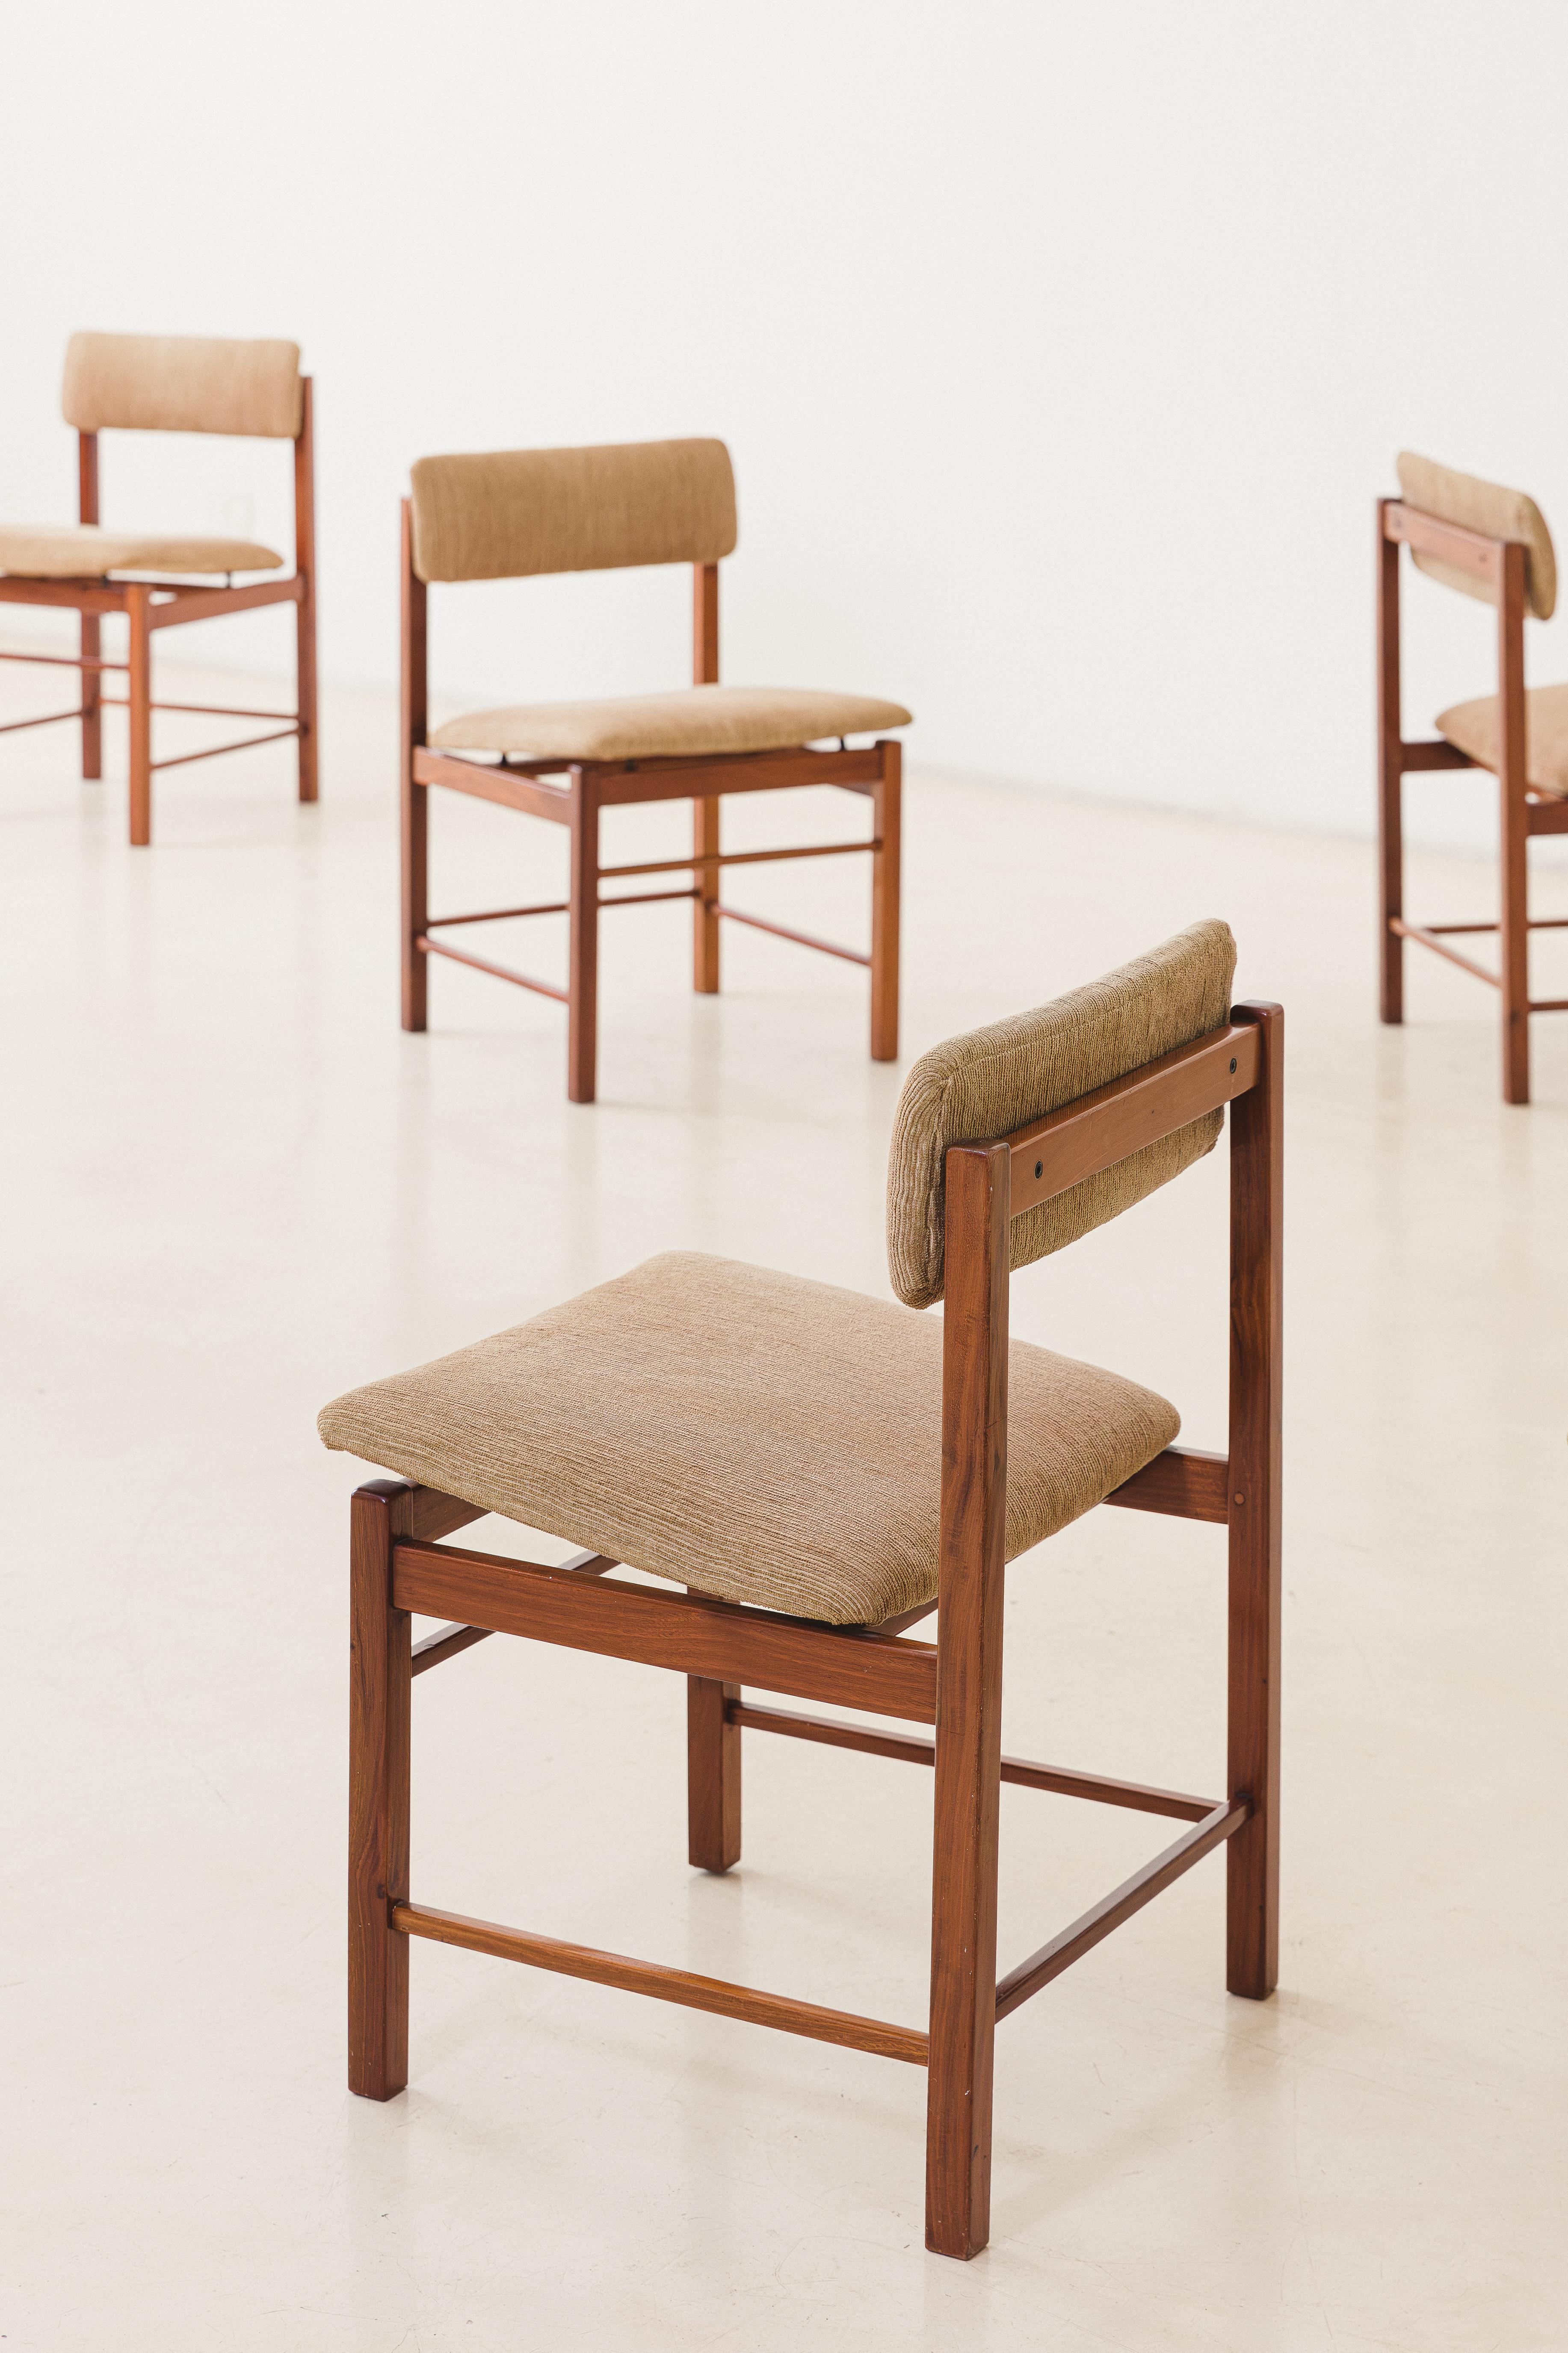 Brazilian Set of Six Dining Chairs by Ernesto Hauner, Freijó Wood, Mobilinea, 1960s For Sale